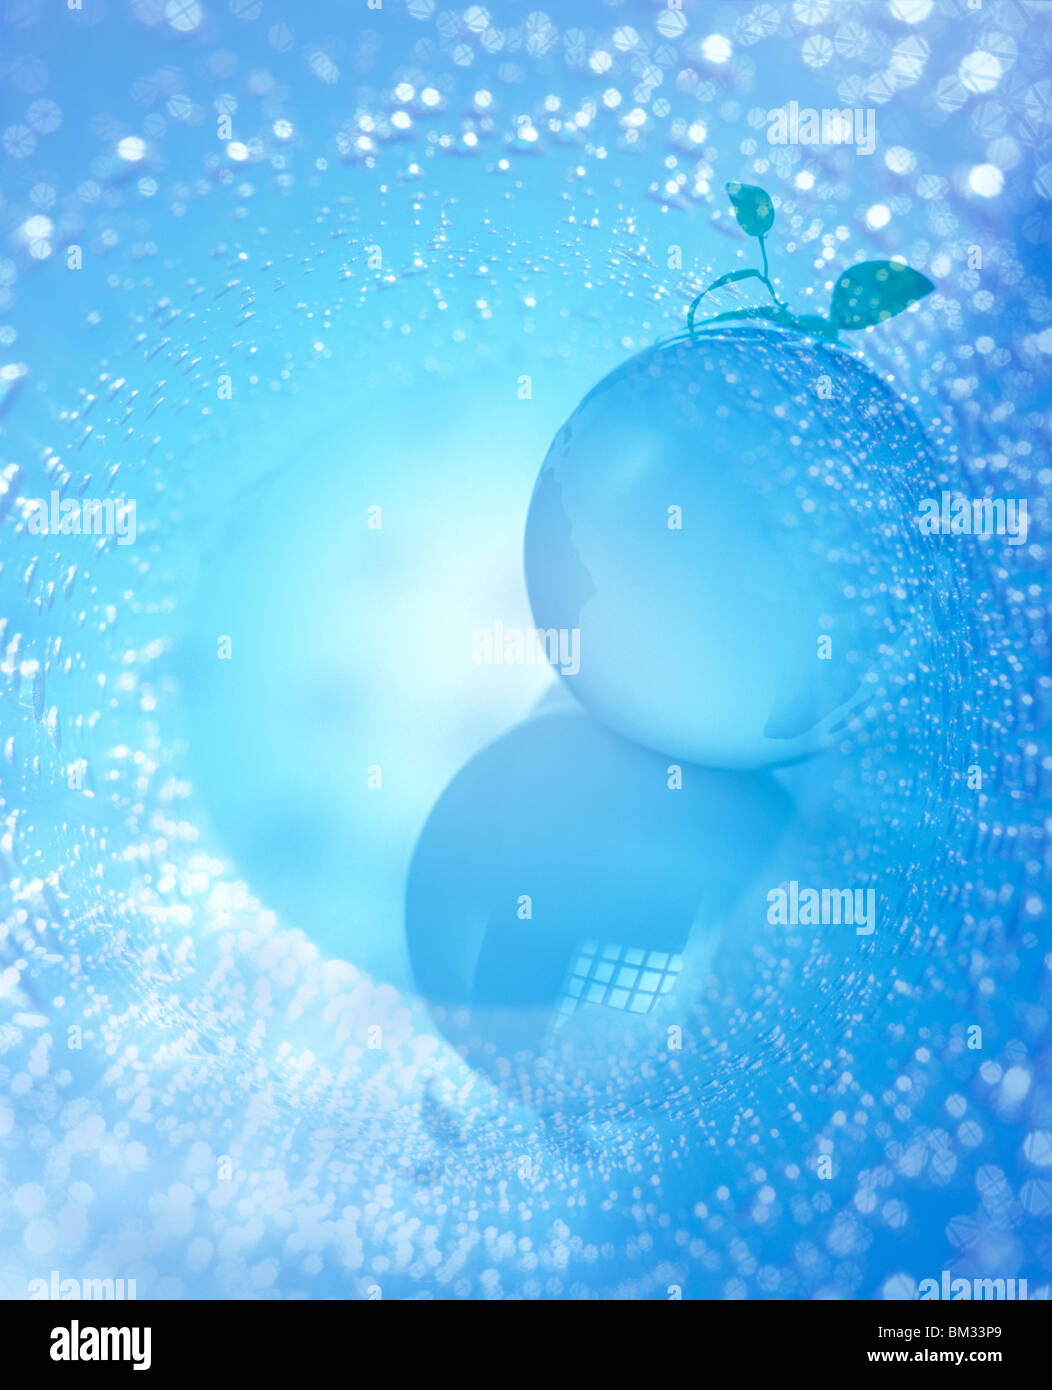 Glass balls and water drops, blue background, computer graphic Stock Photo